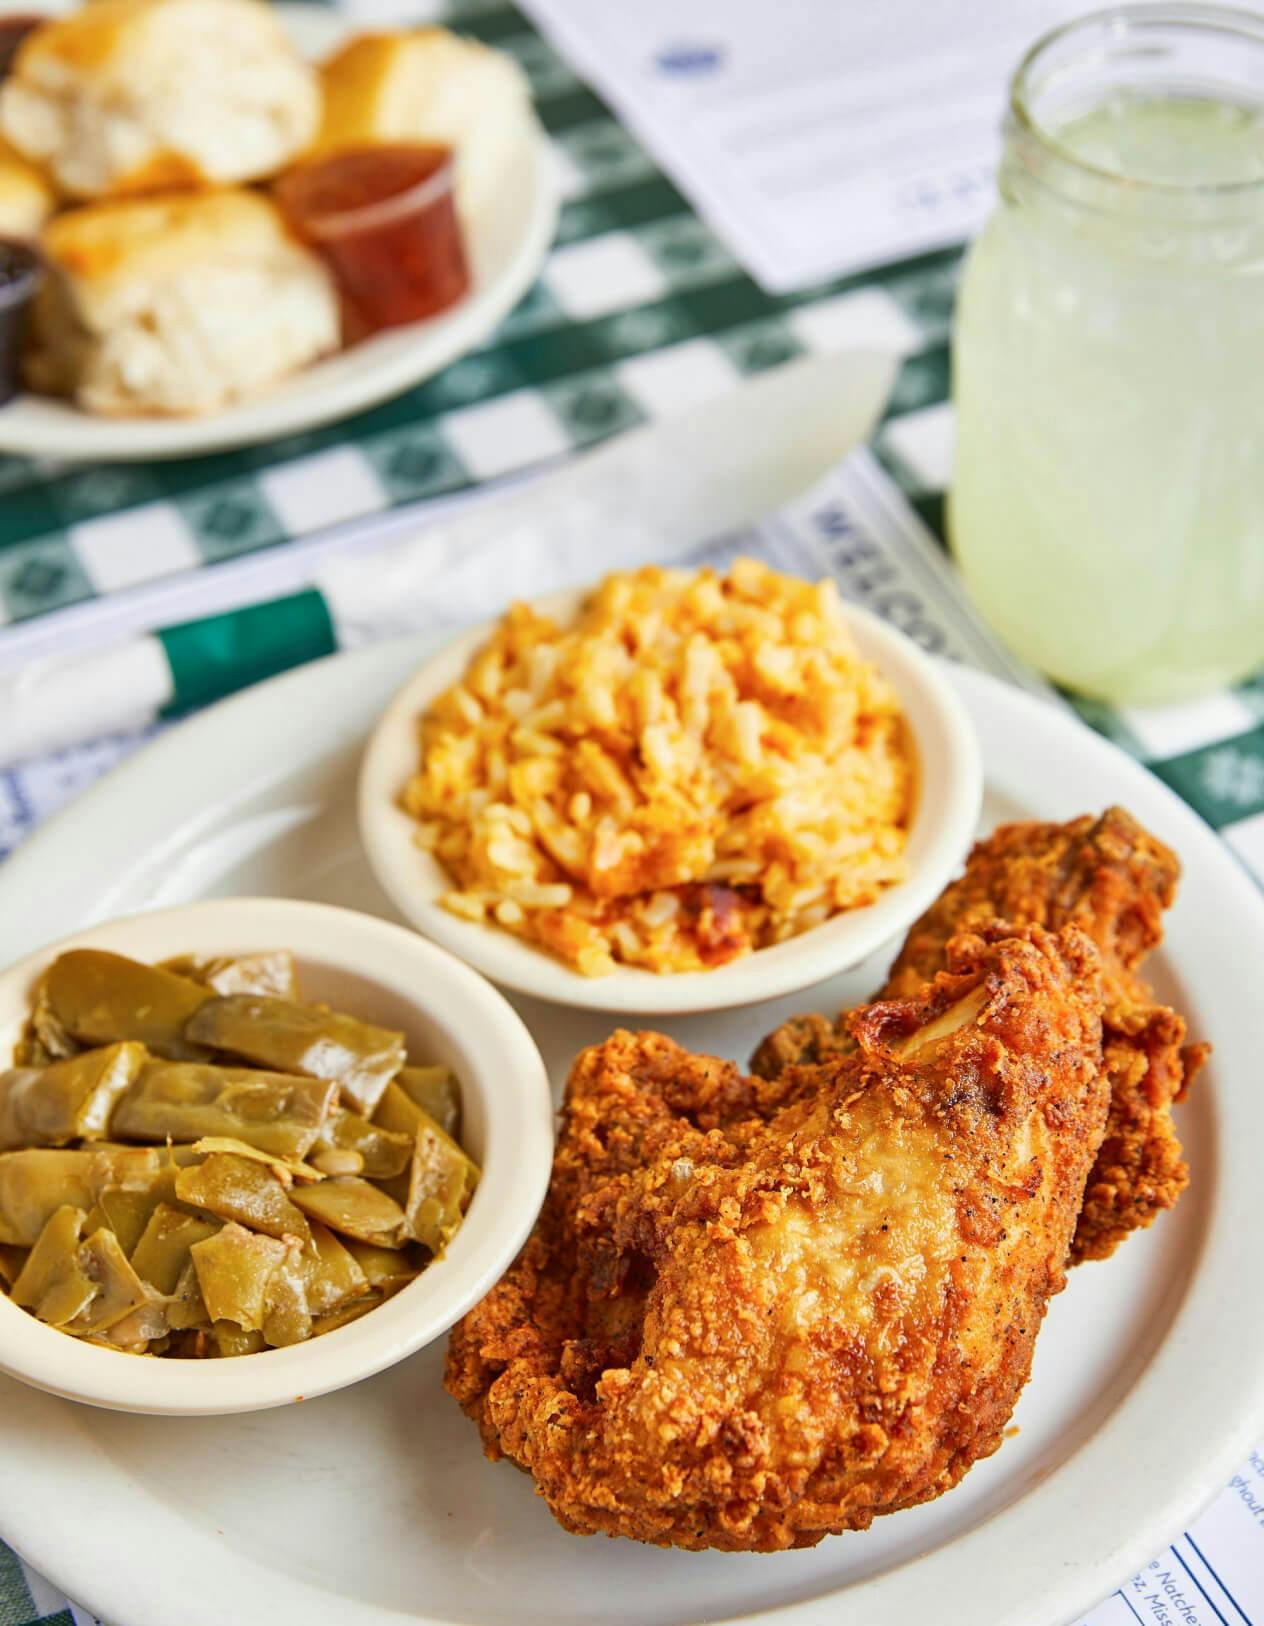 A plate with a piece of fried chicken, green beans, and mac and cheese sits on top of a menu on a green checkered tablecloth. There is a mason jar of lemonade to the right of the plate of food and behind it is another plate with a pile of biscuits that is slightly out of focus.